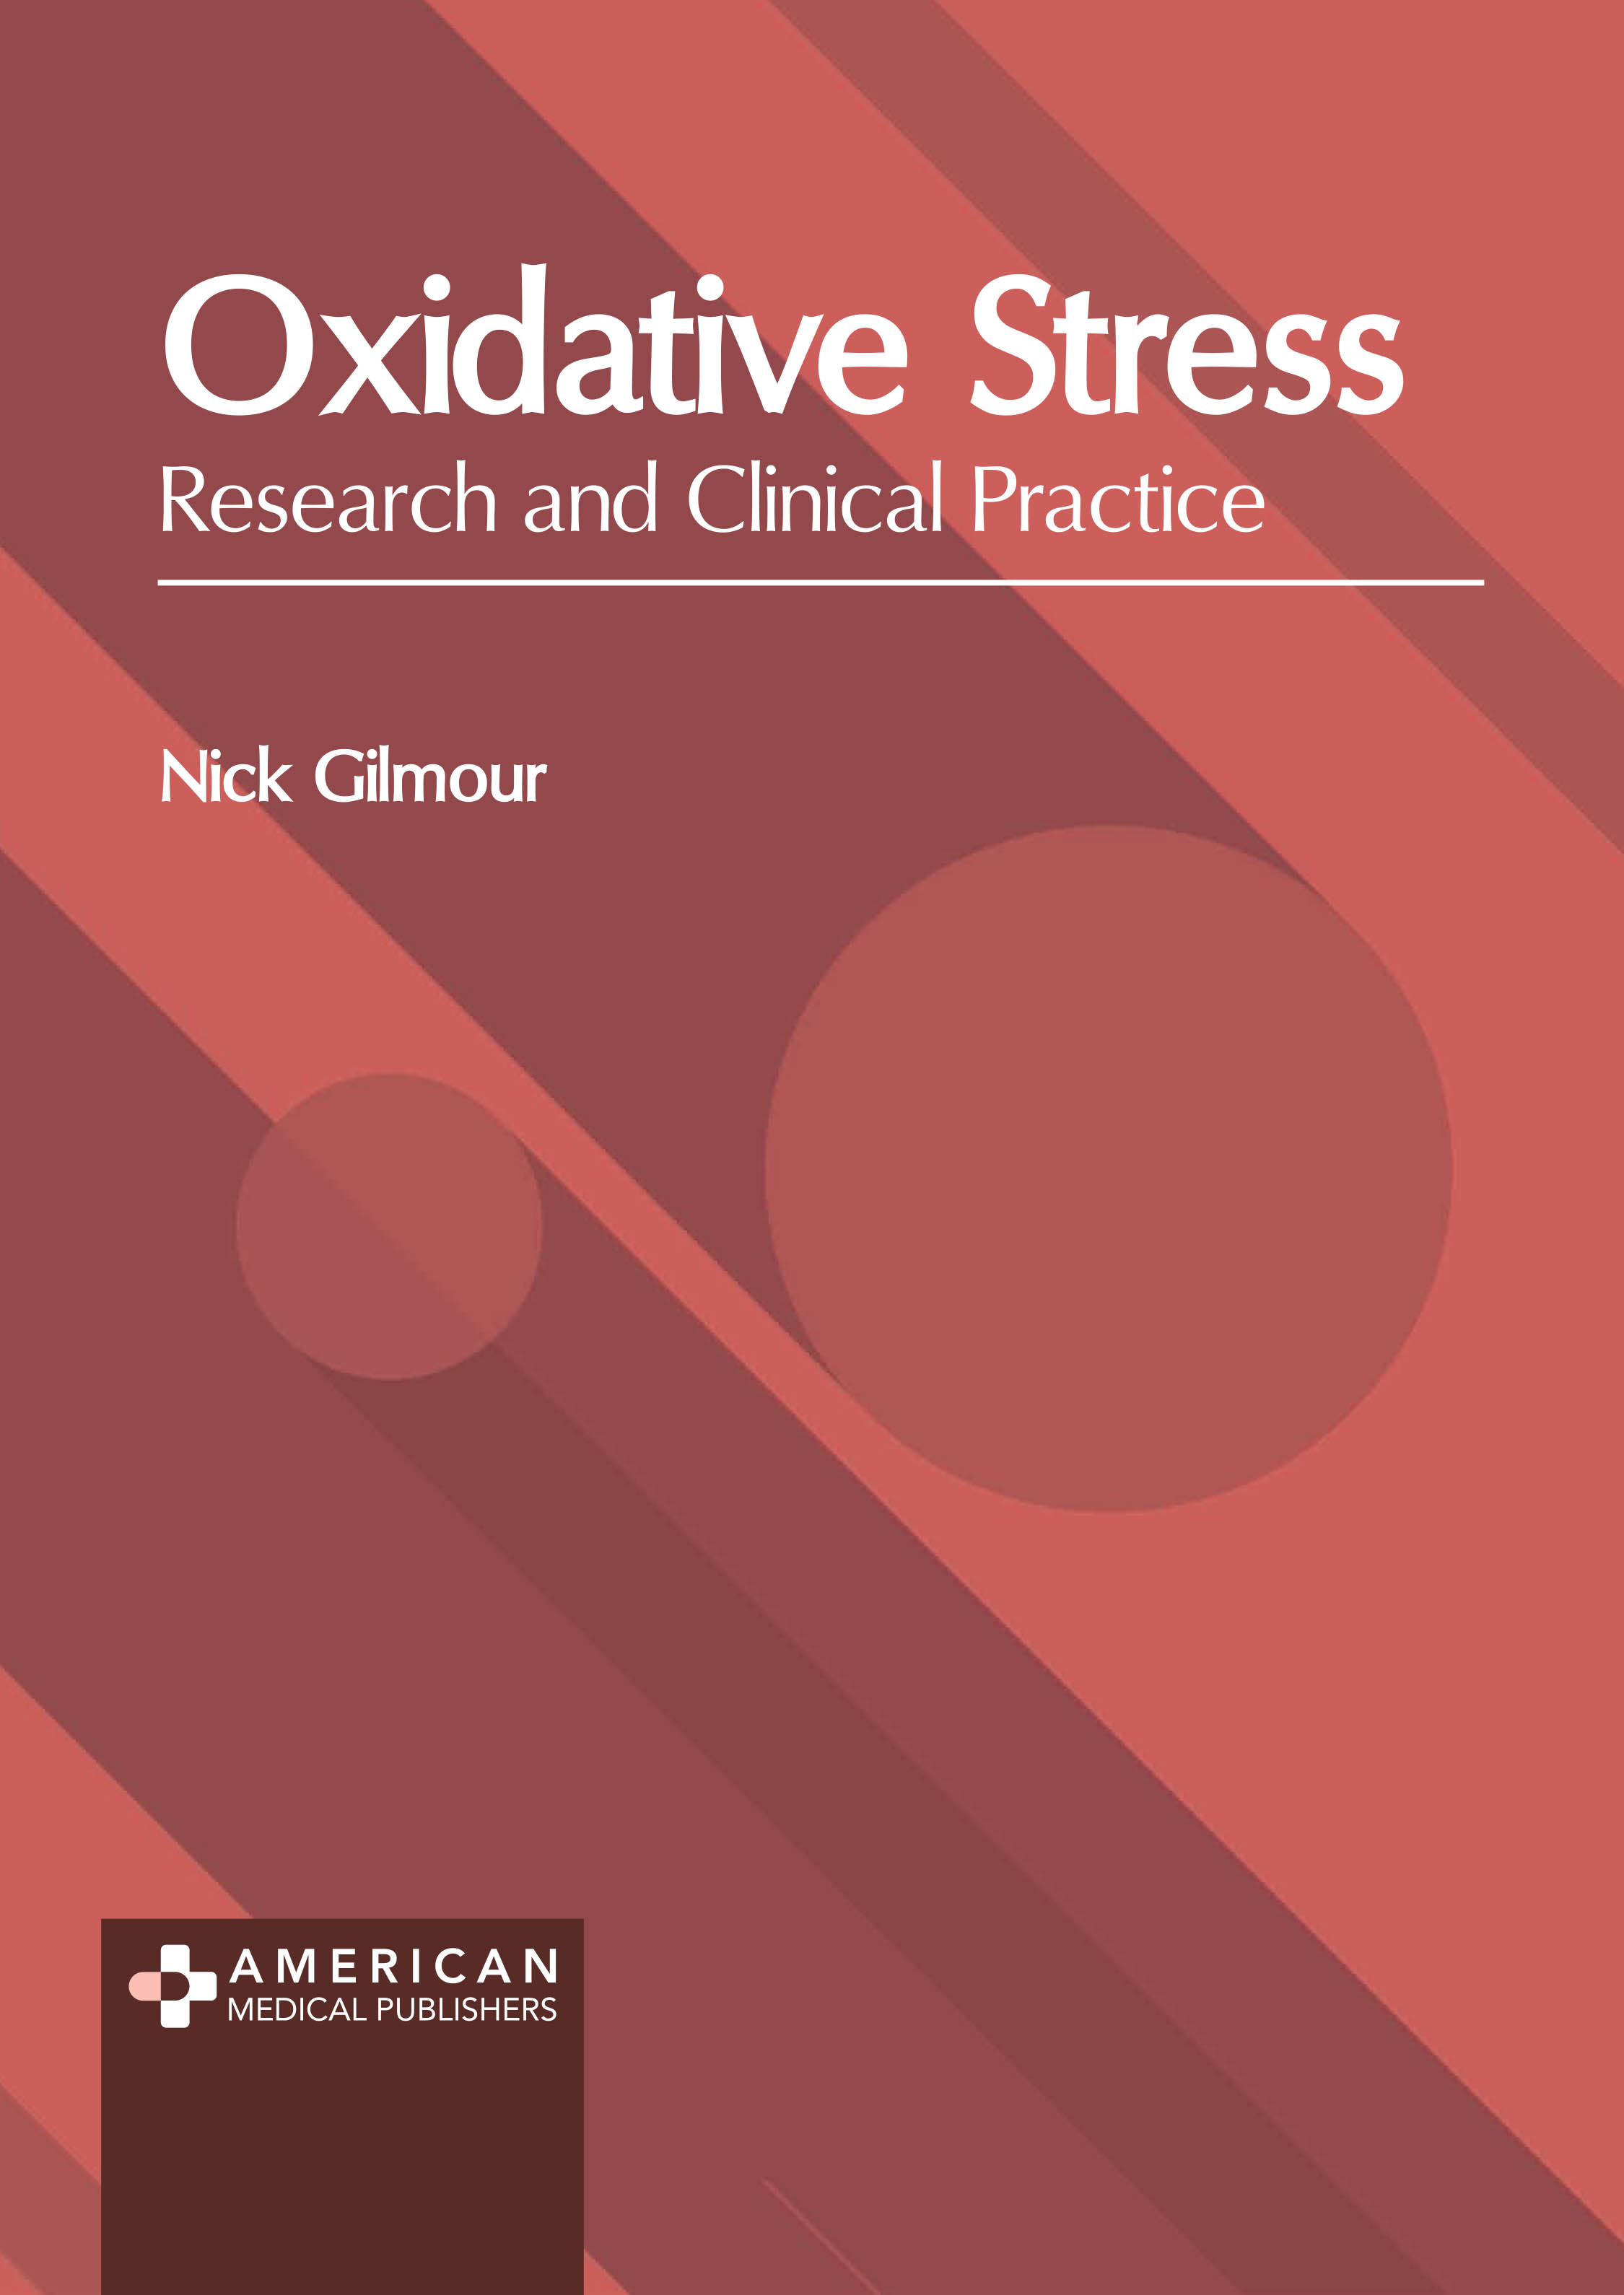 OXIDATIVE STRESS: RESEARCH AND CLINICAL PRACTICE